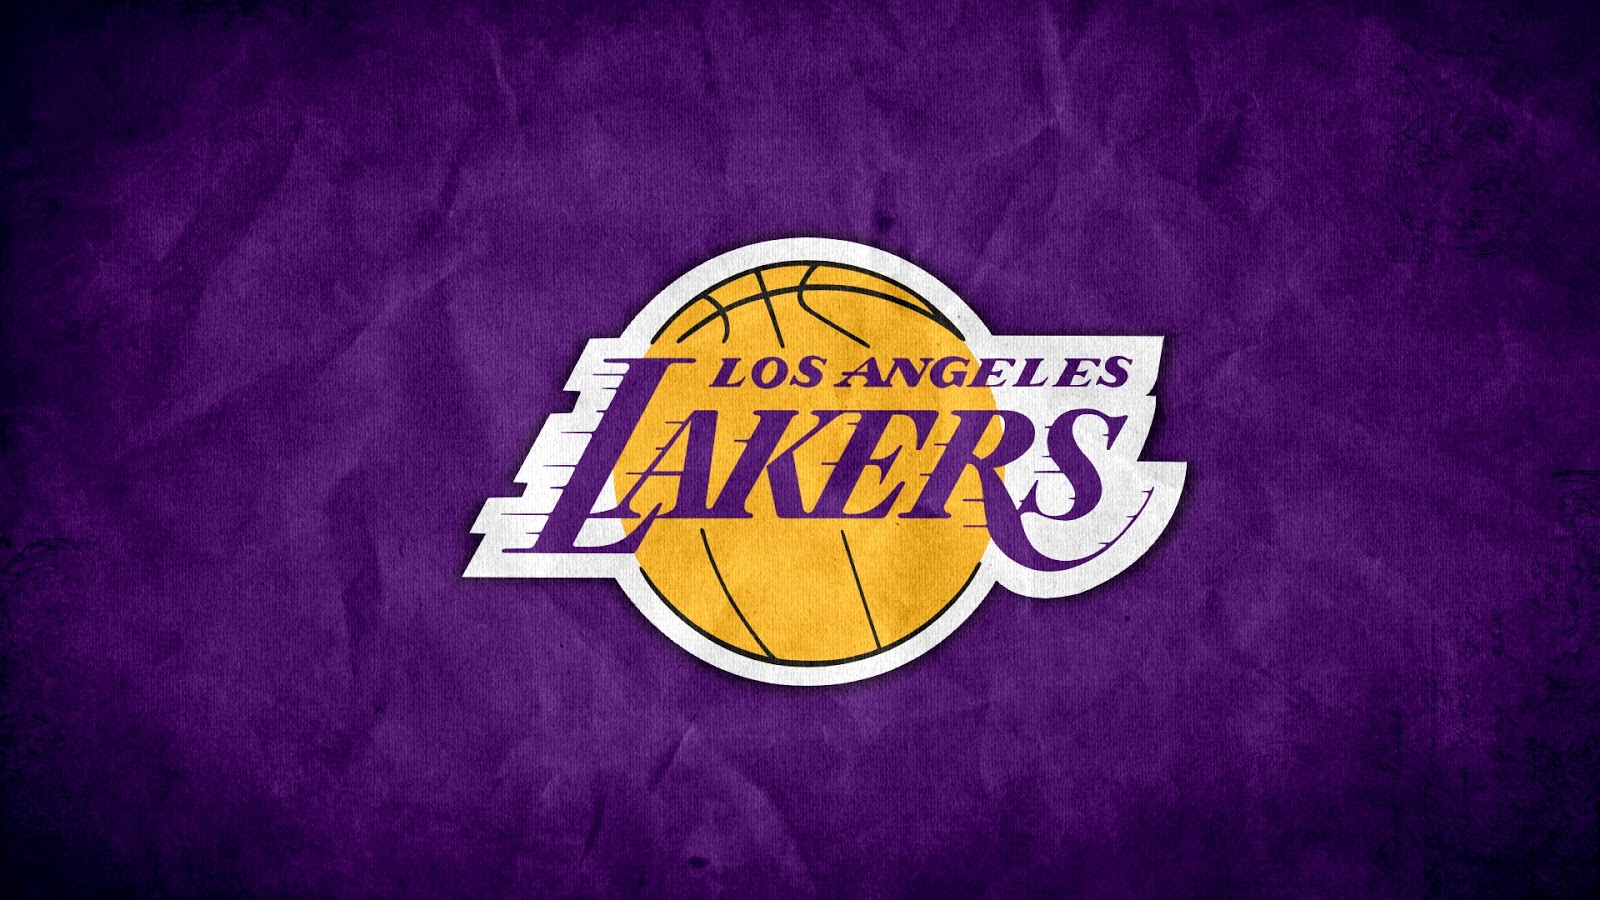 Free Wallpapers by Valdazzar Los Angeles Lakers Wallpapers